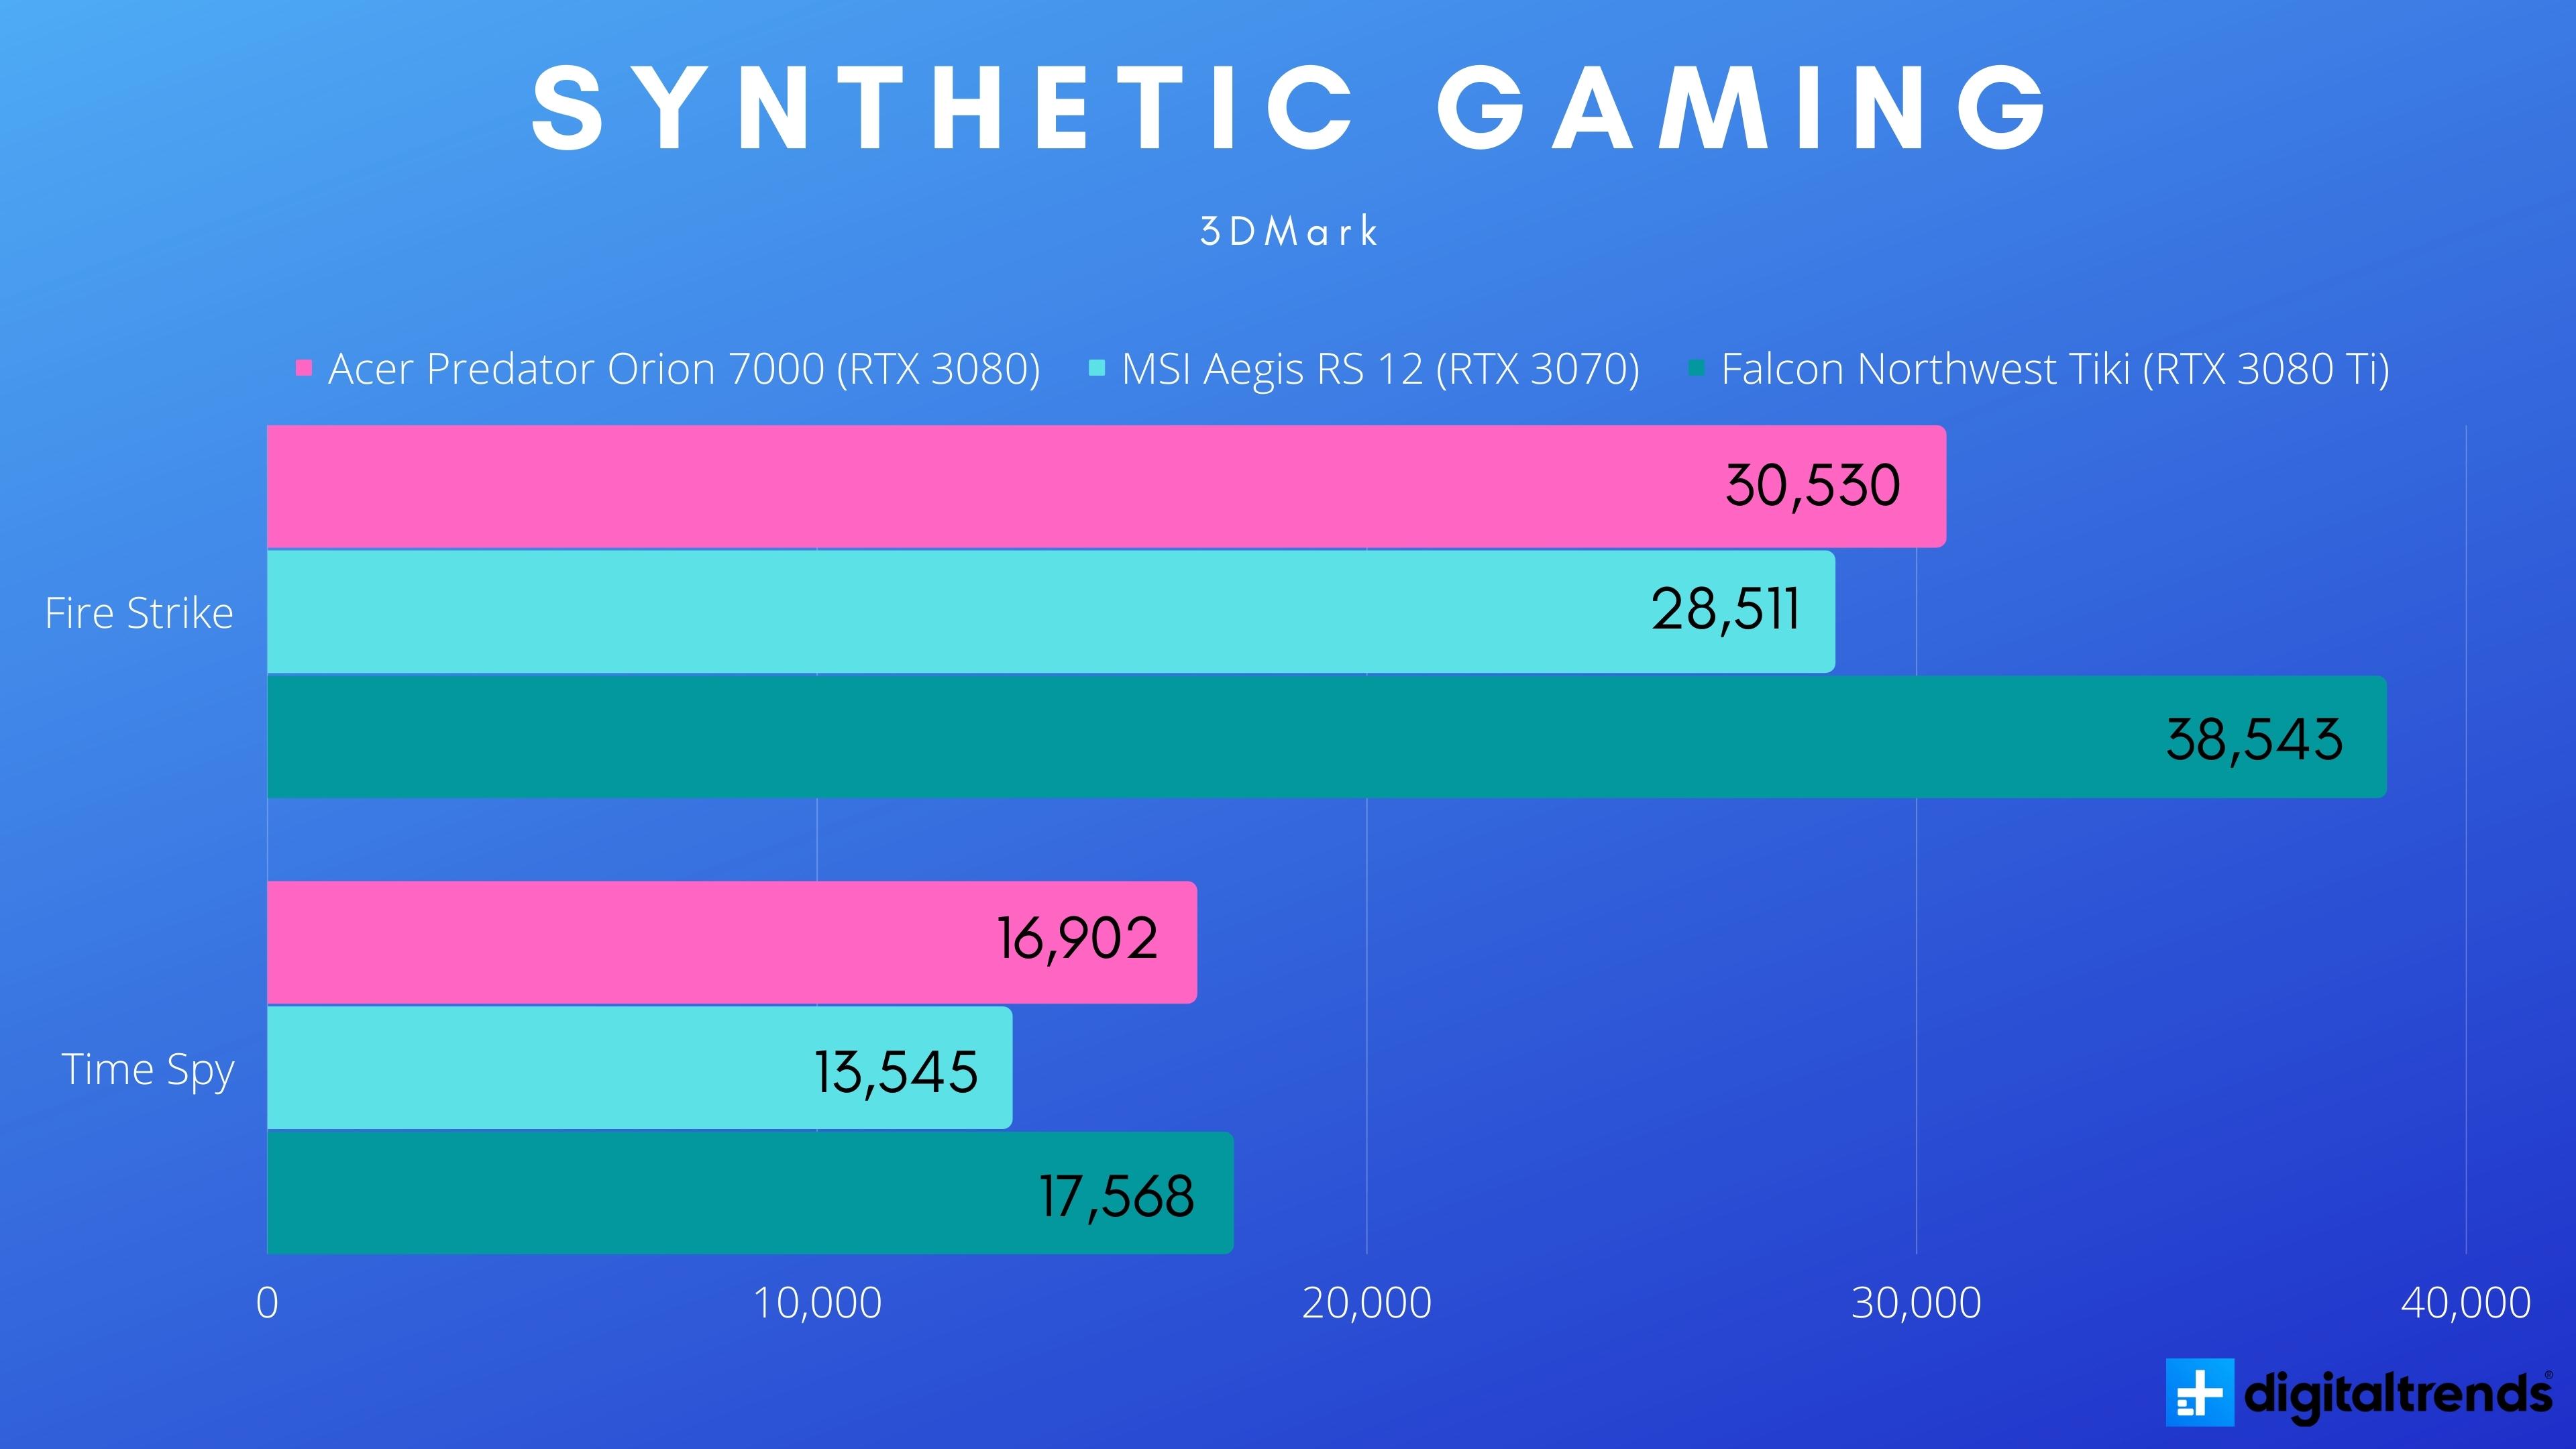 Synthetic gaming performance for the Acer Predator Orion 7000.